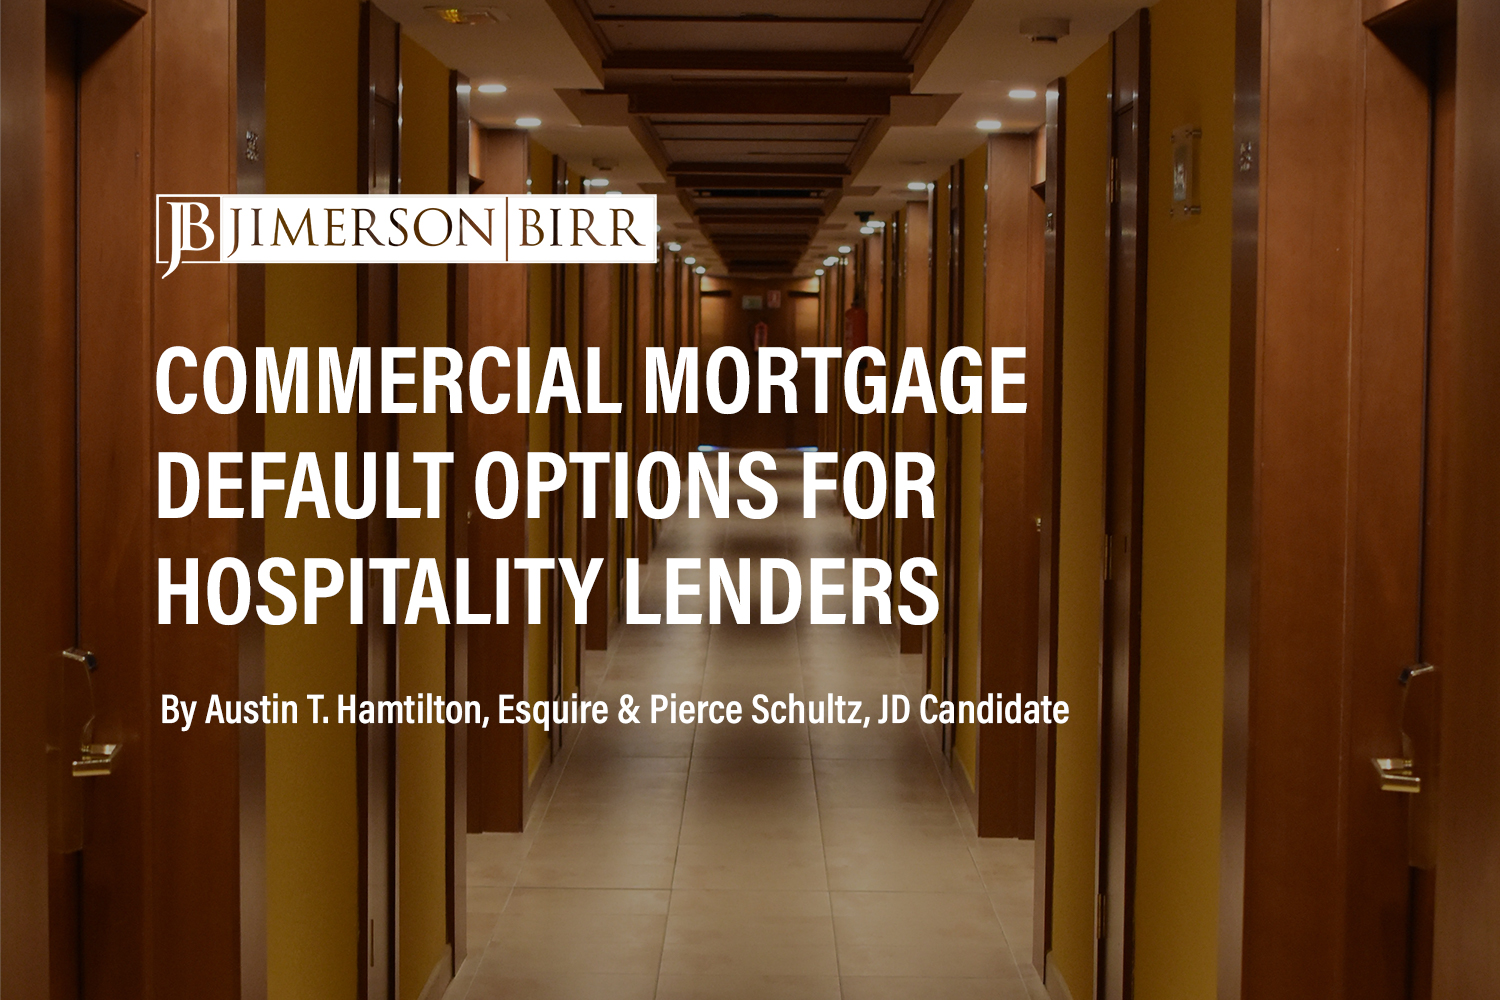 Mitigating Risks Associated with Hotel, Restaurant and Entertainment Industry Economic Challenges – Part 3: Commercial Mortgage Default Options Including Acceleration and Enforcement of Personal Guaranties